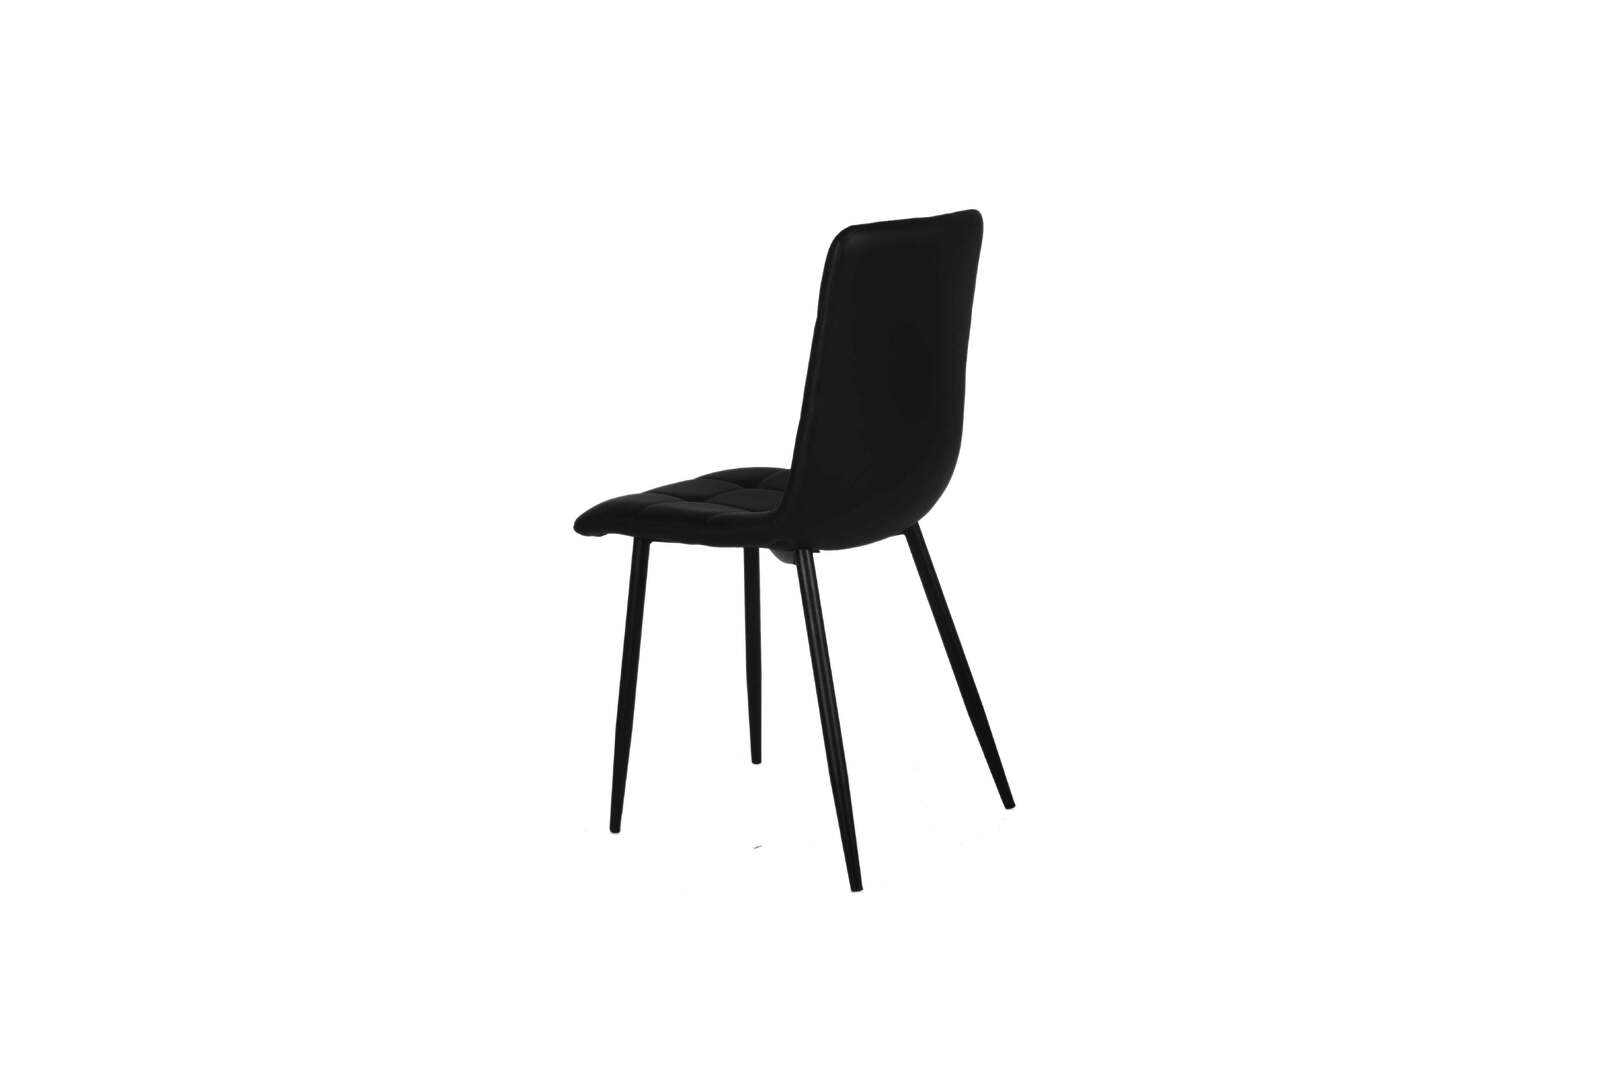 Garry Ultrasuede Dining Chairs, Black Set of 2